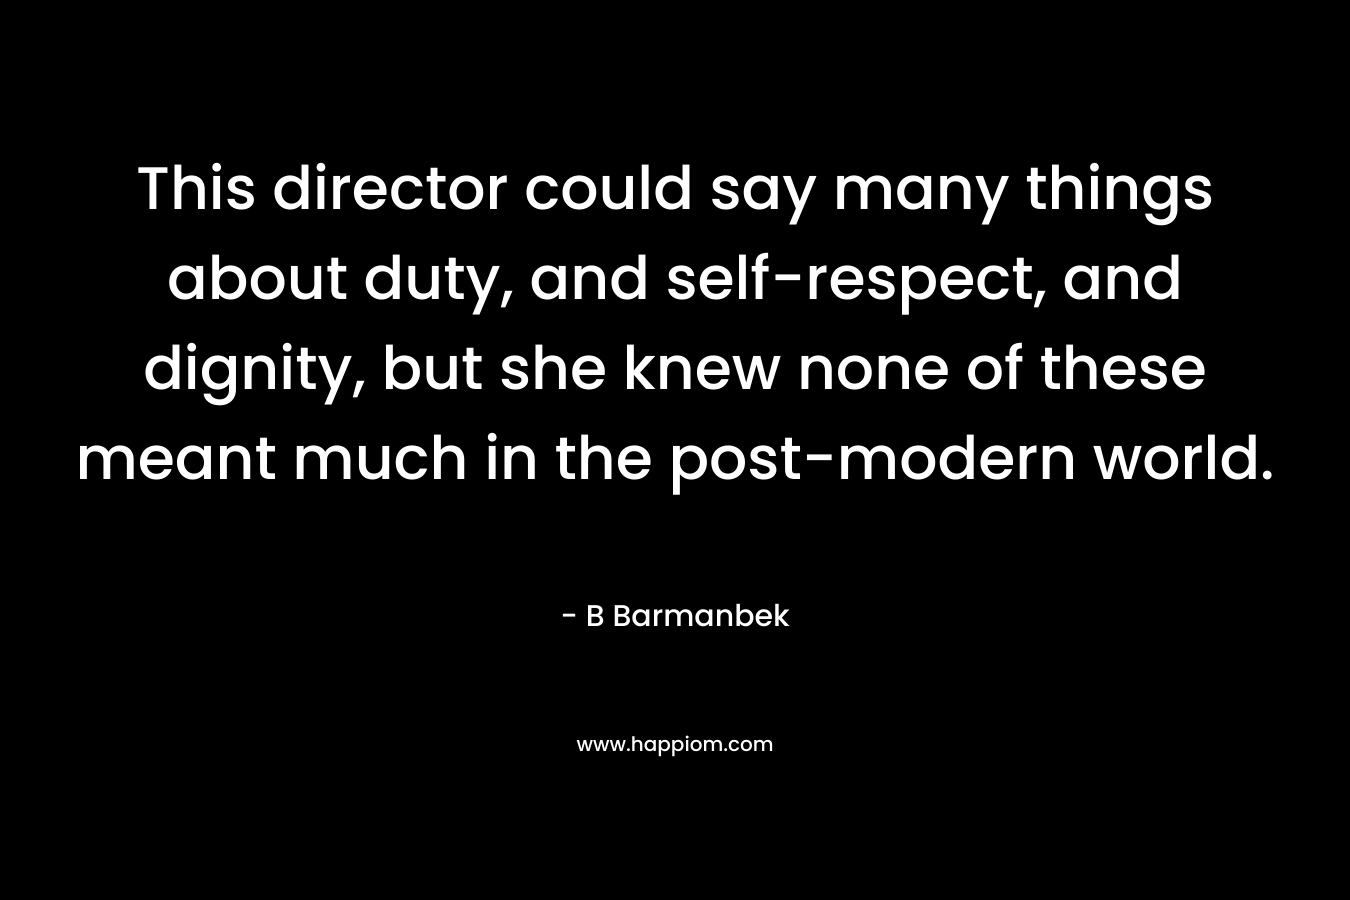 This director could say many things about duty, and self-respect, and dignity, but she knew none of these meant much in the post-modern world. – B Barmanbek